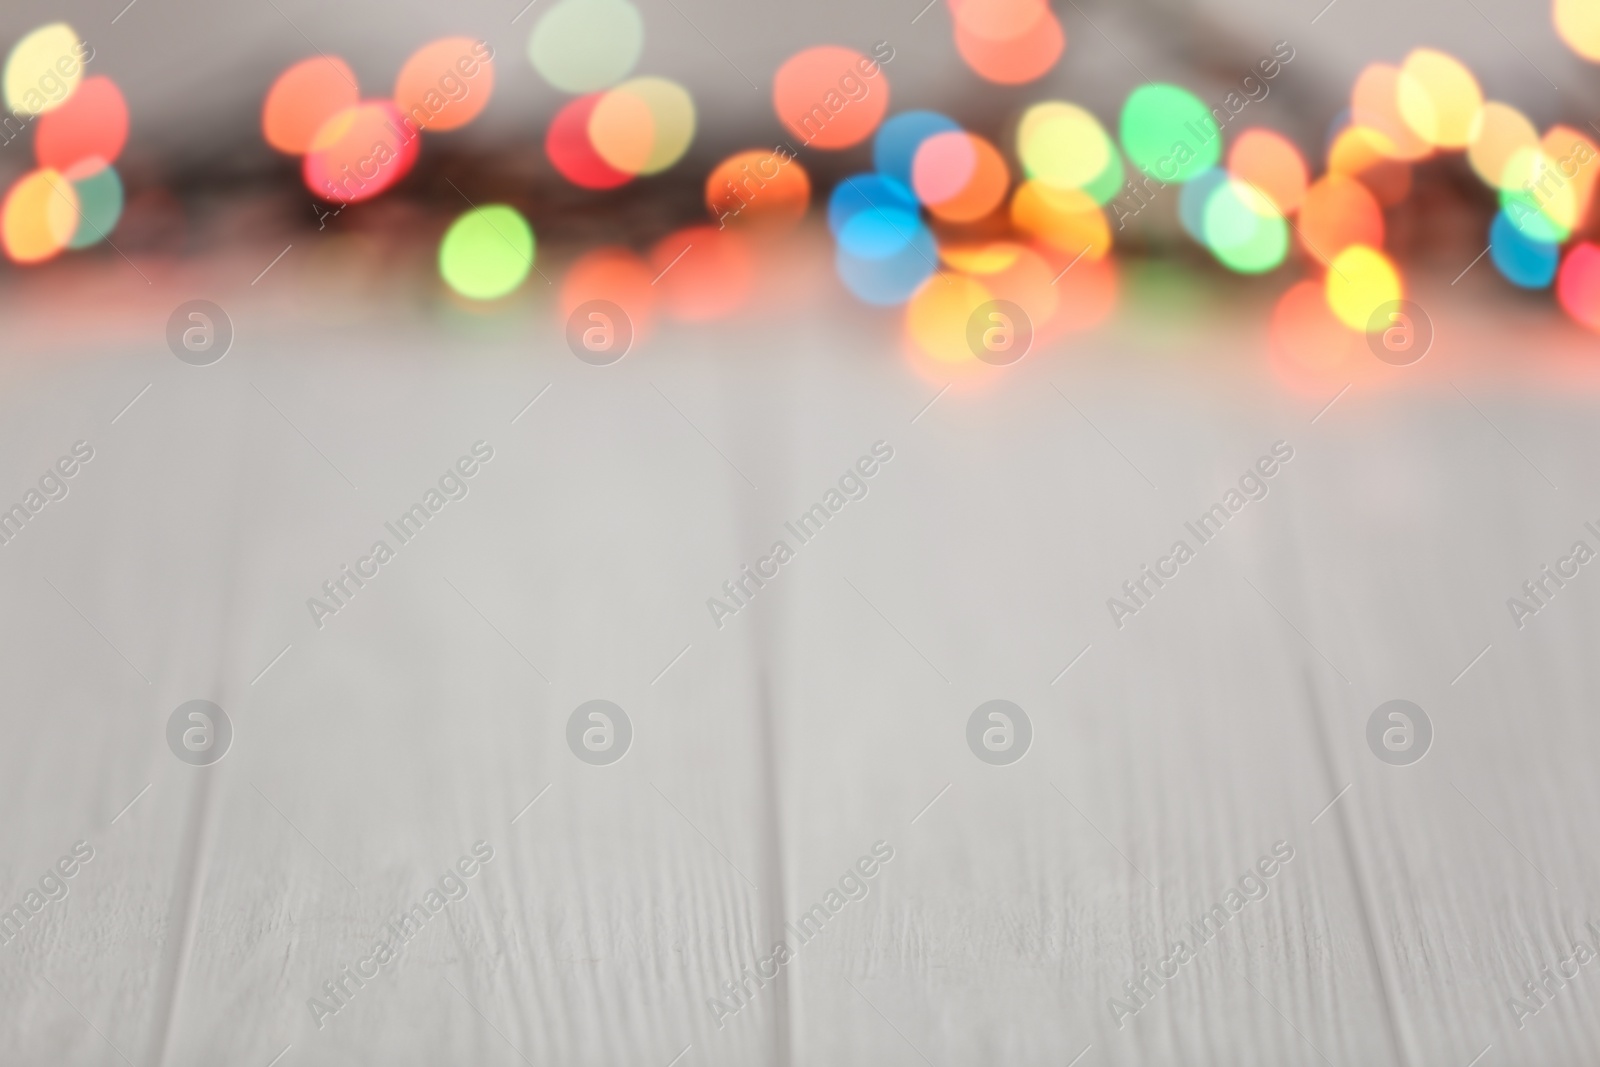 Photo of Colorful lights on light wooden table, blurred view. Space for text